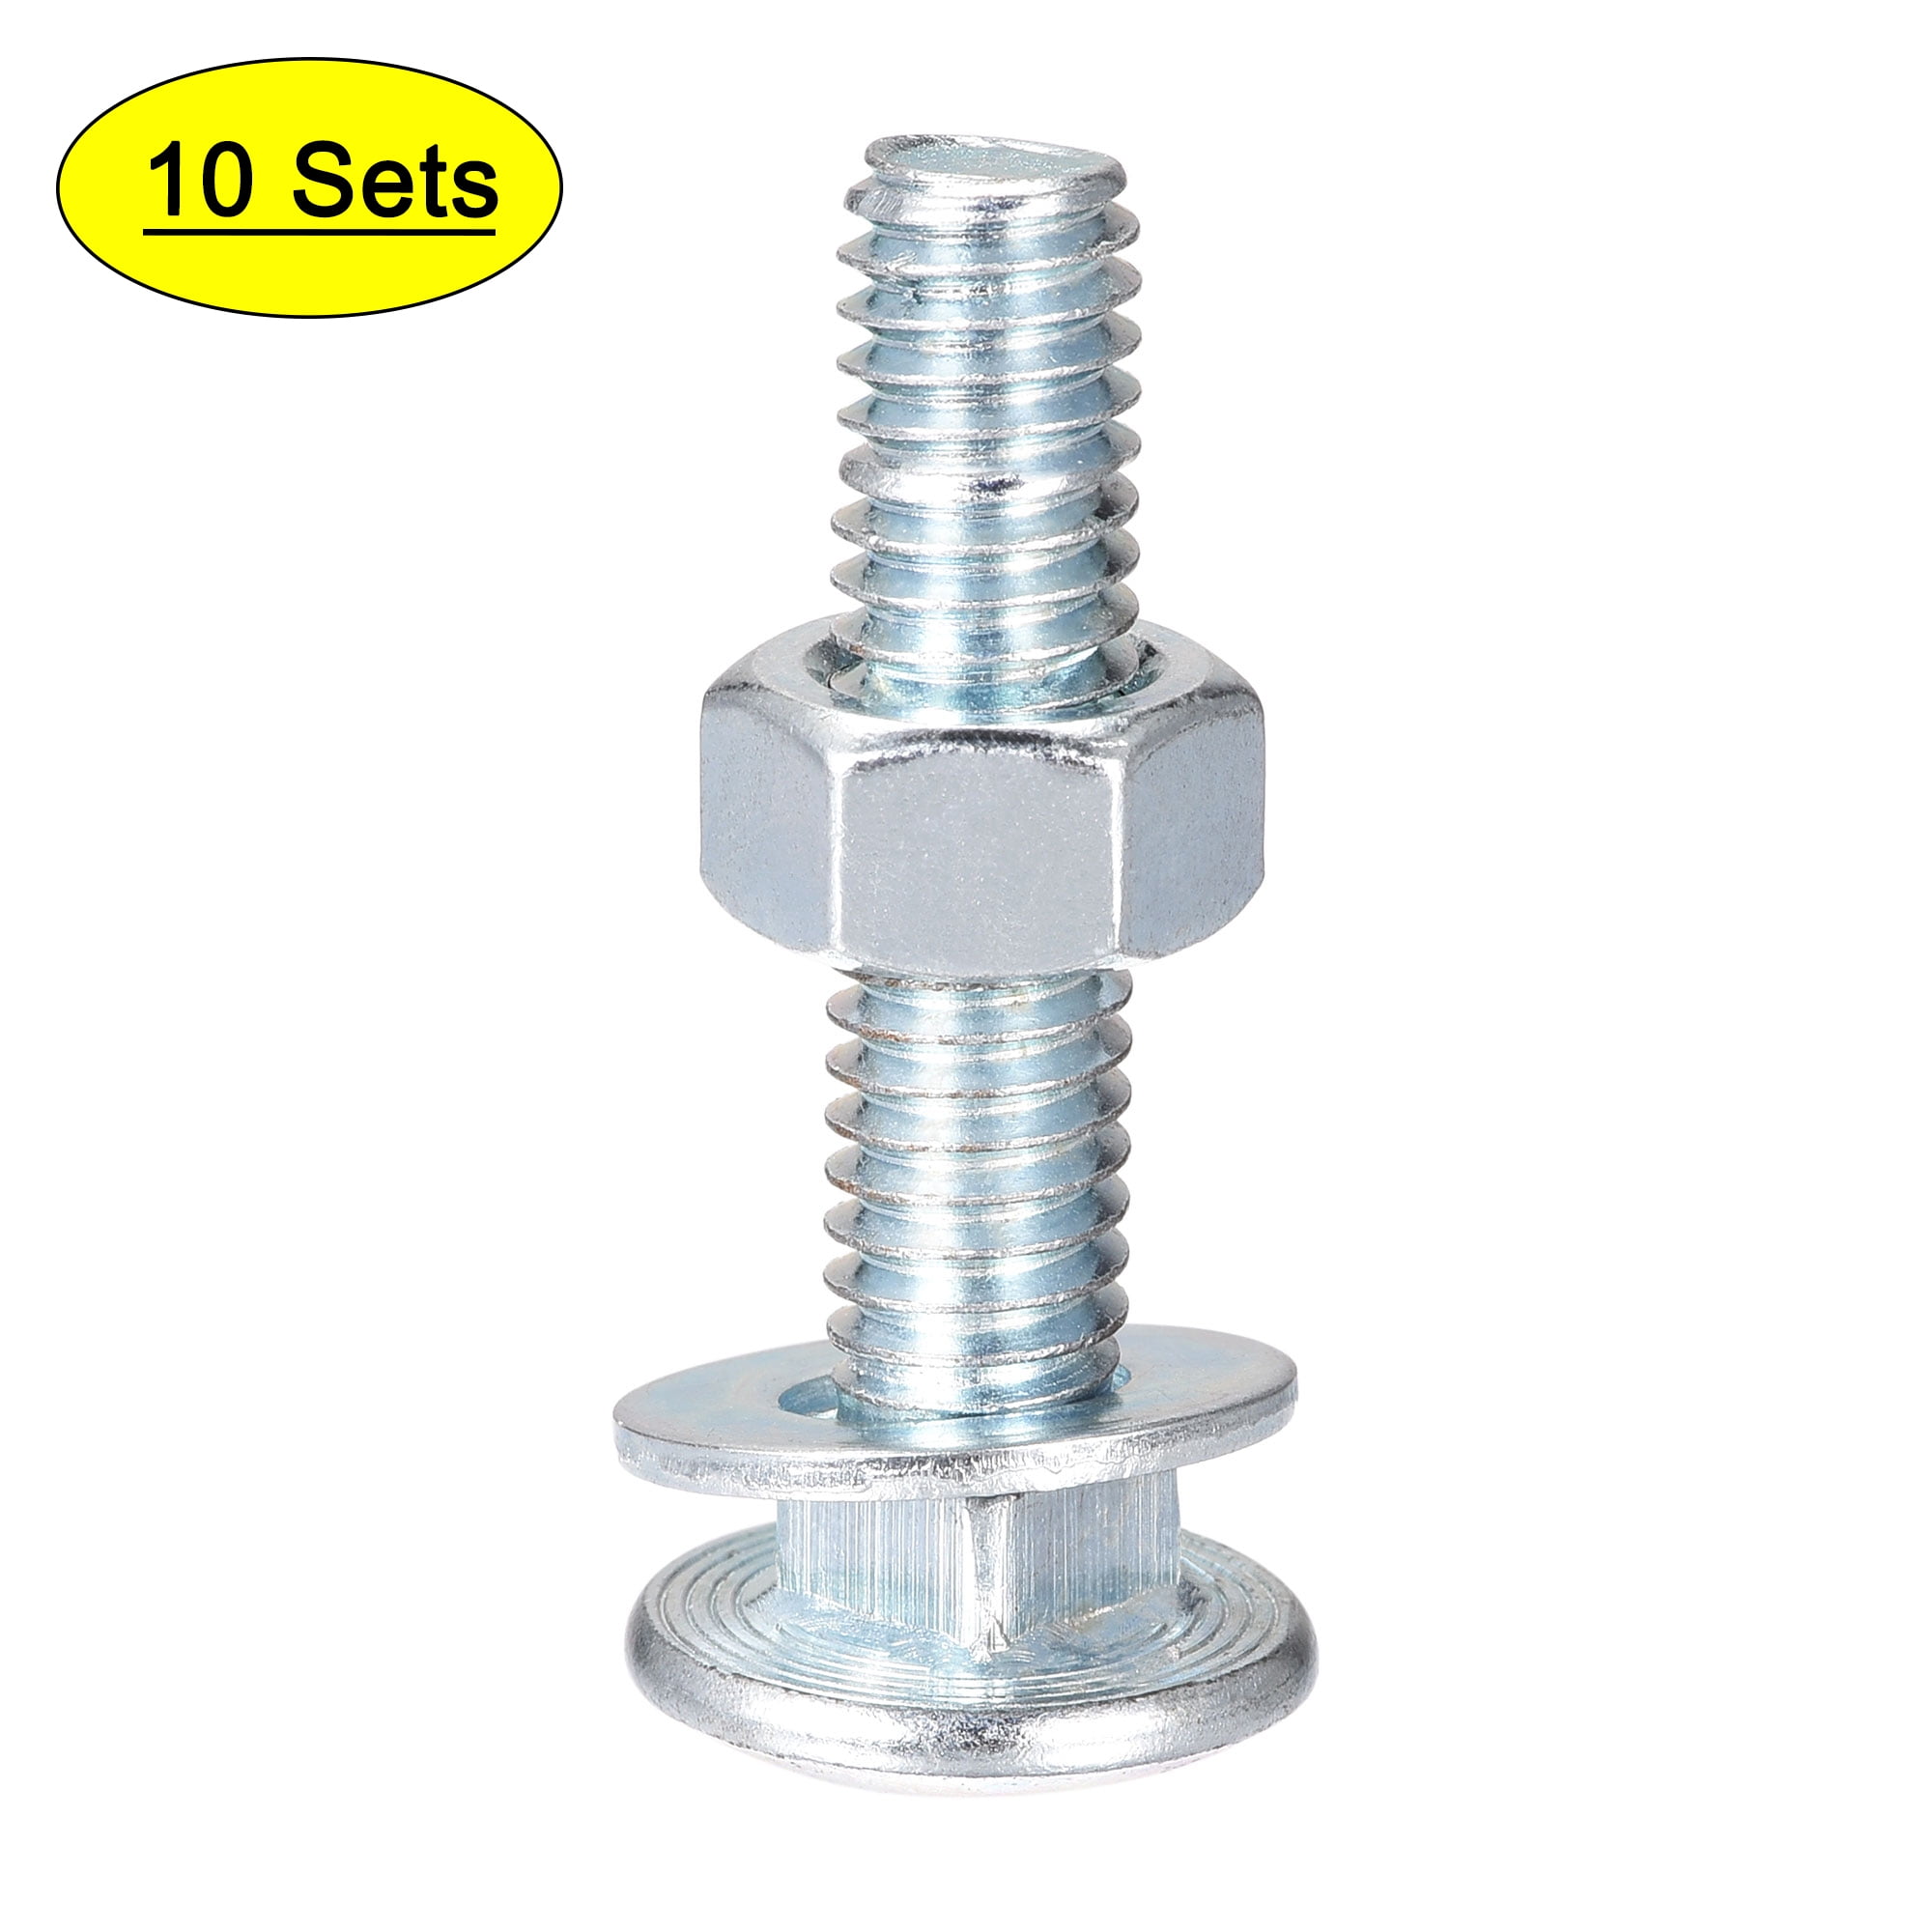 Flat 5/16 & 3/8 Lock nuts 1/4 Washers Stainless Nut & Washer assortment #10 